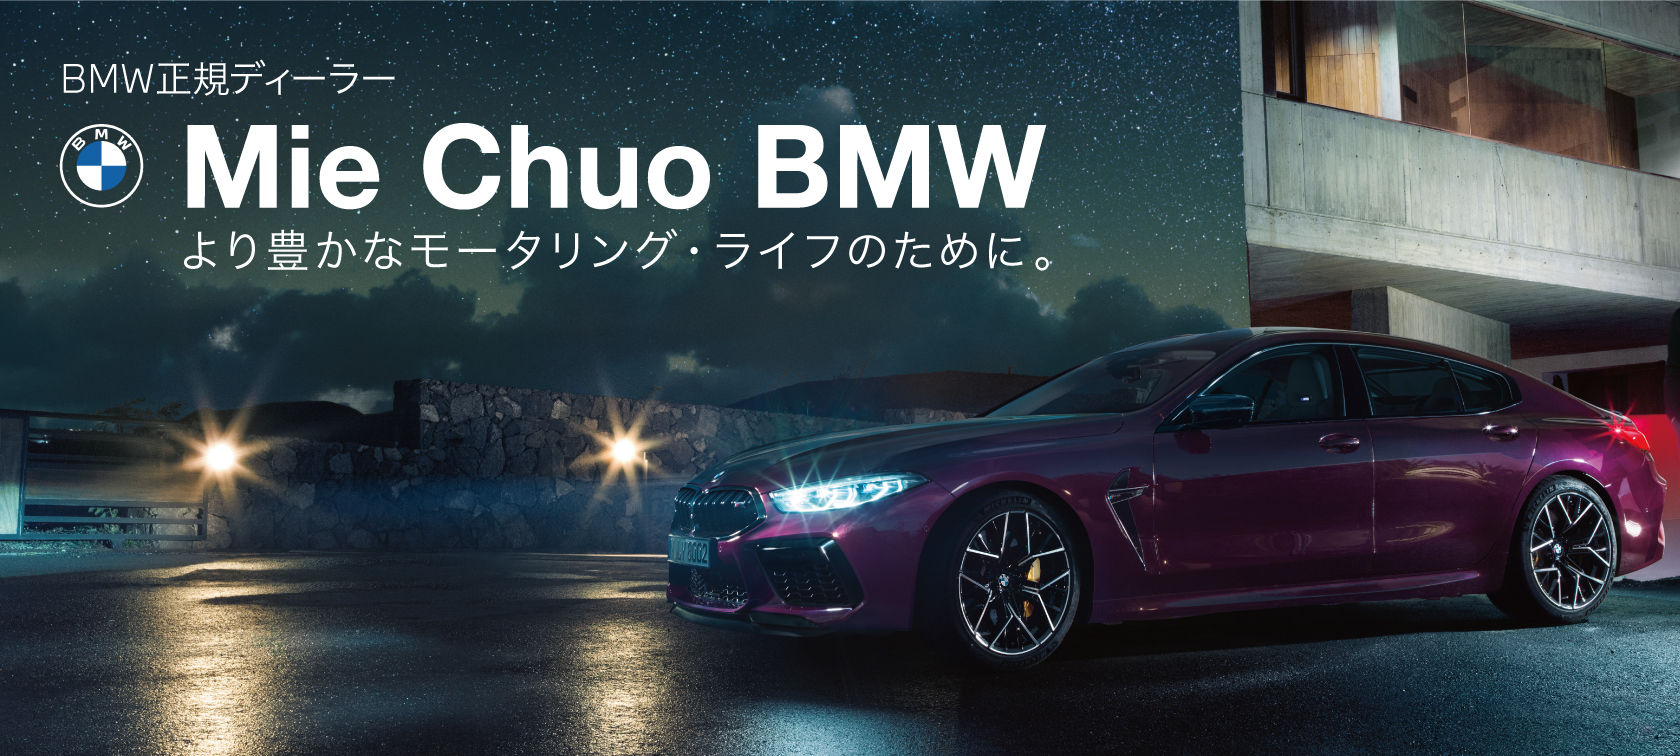 Mie Chuo BMW TOP